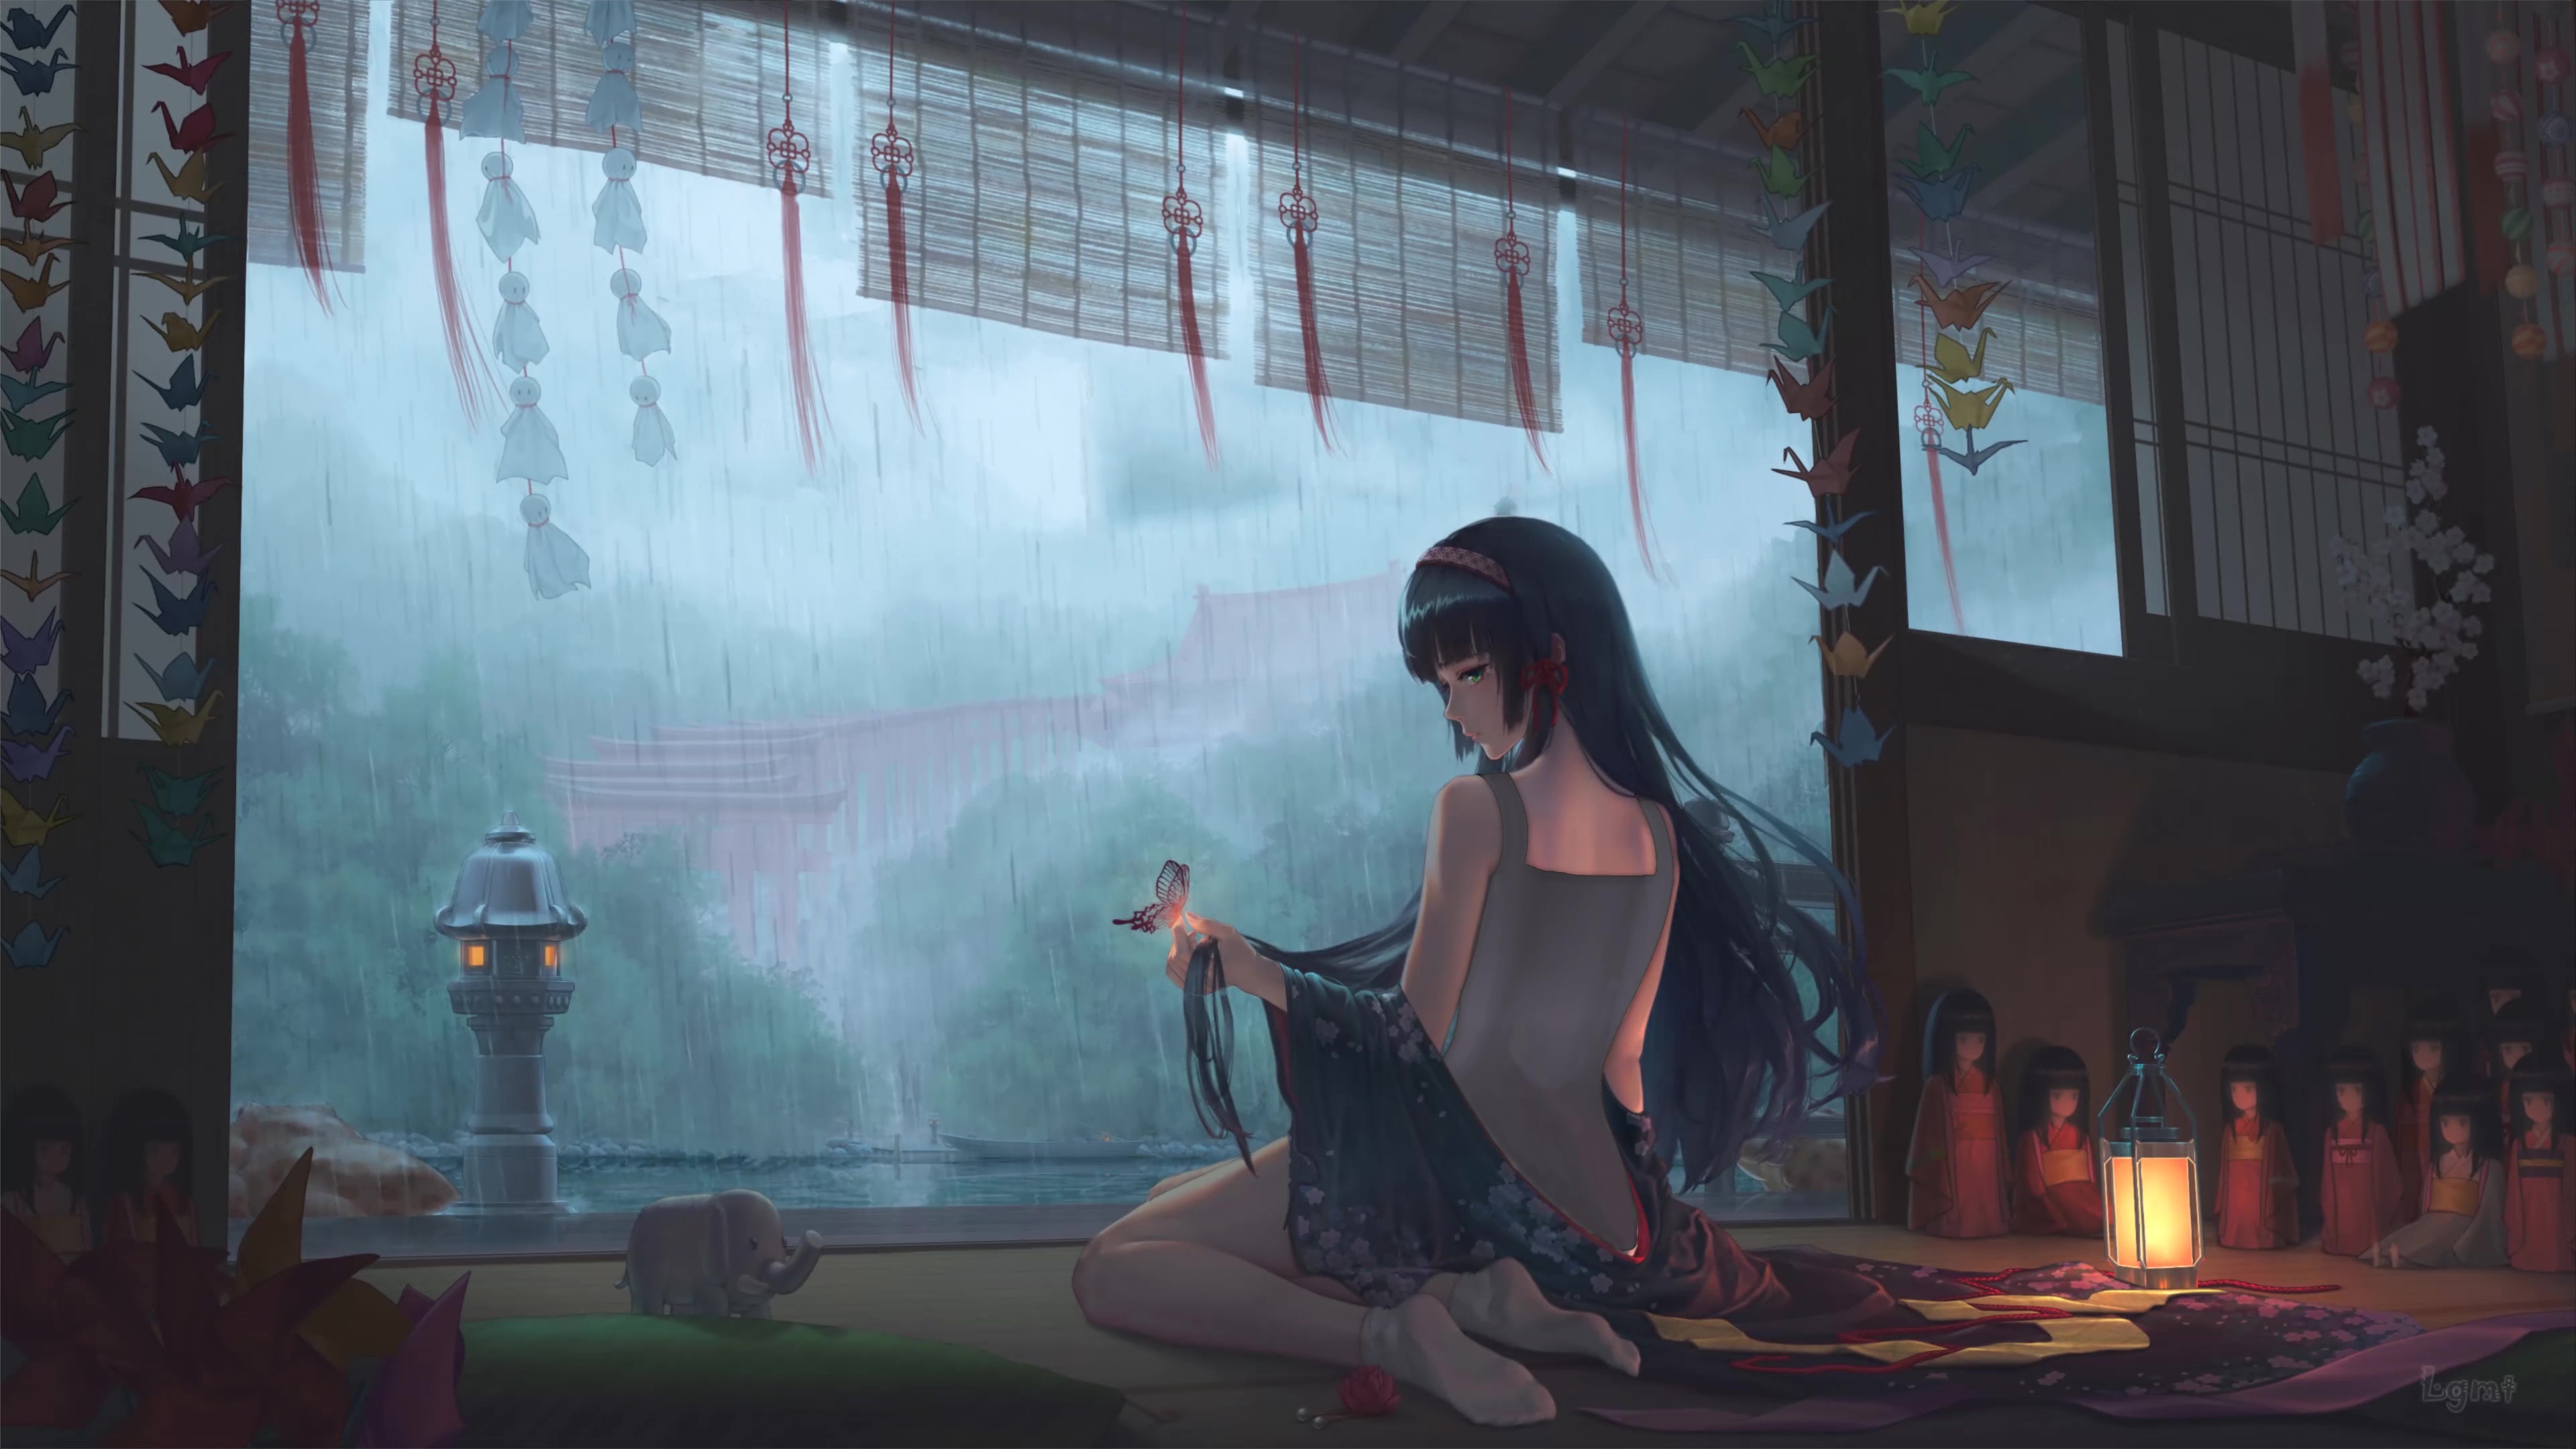 Anime Girl In A Rainy Day Live Wallpaper - HDLiveWall.com.